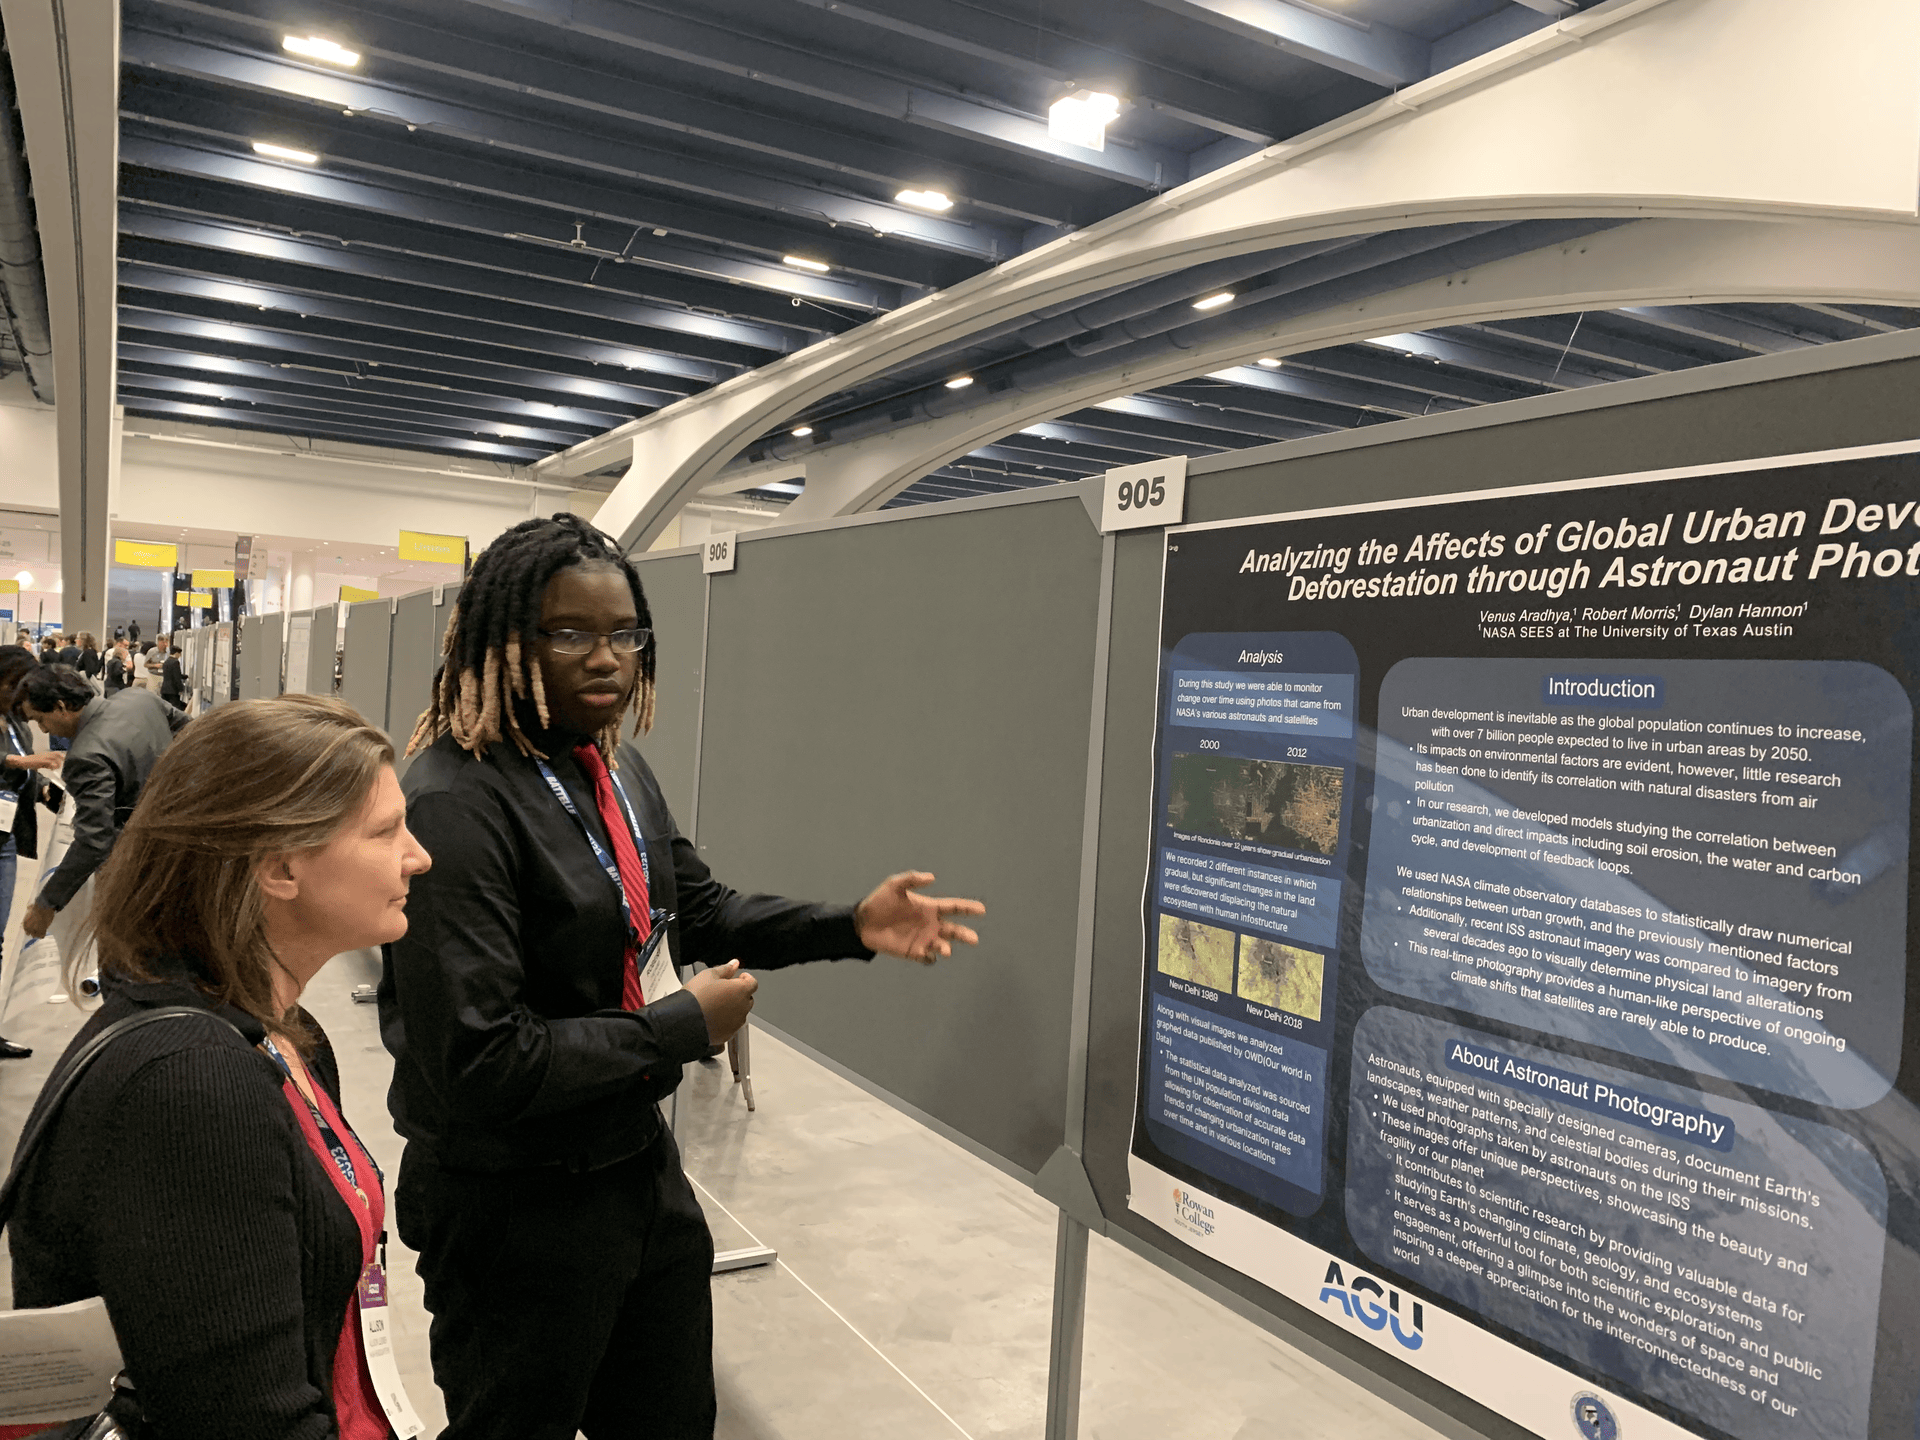 AGU poster sessions provided many opportunities to learn about Earth and space science